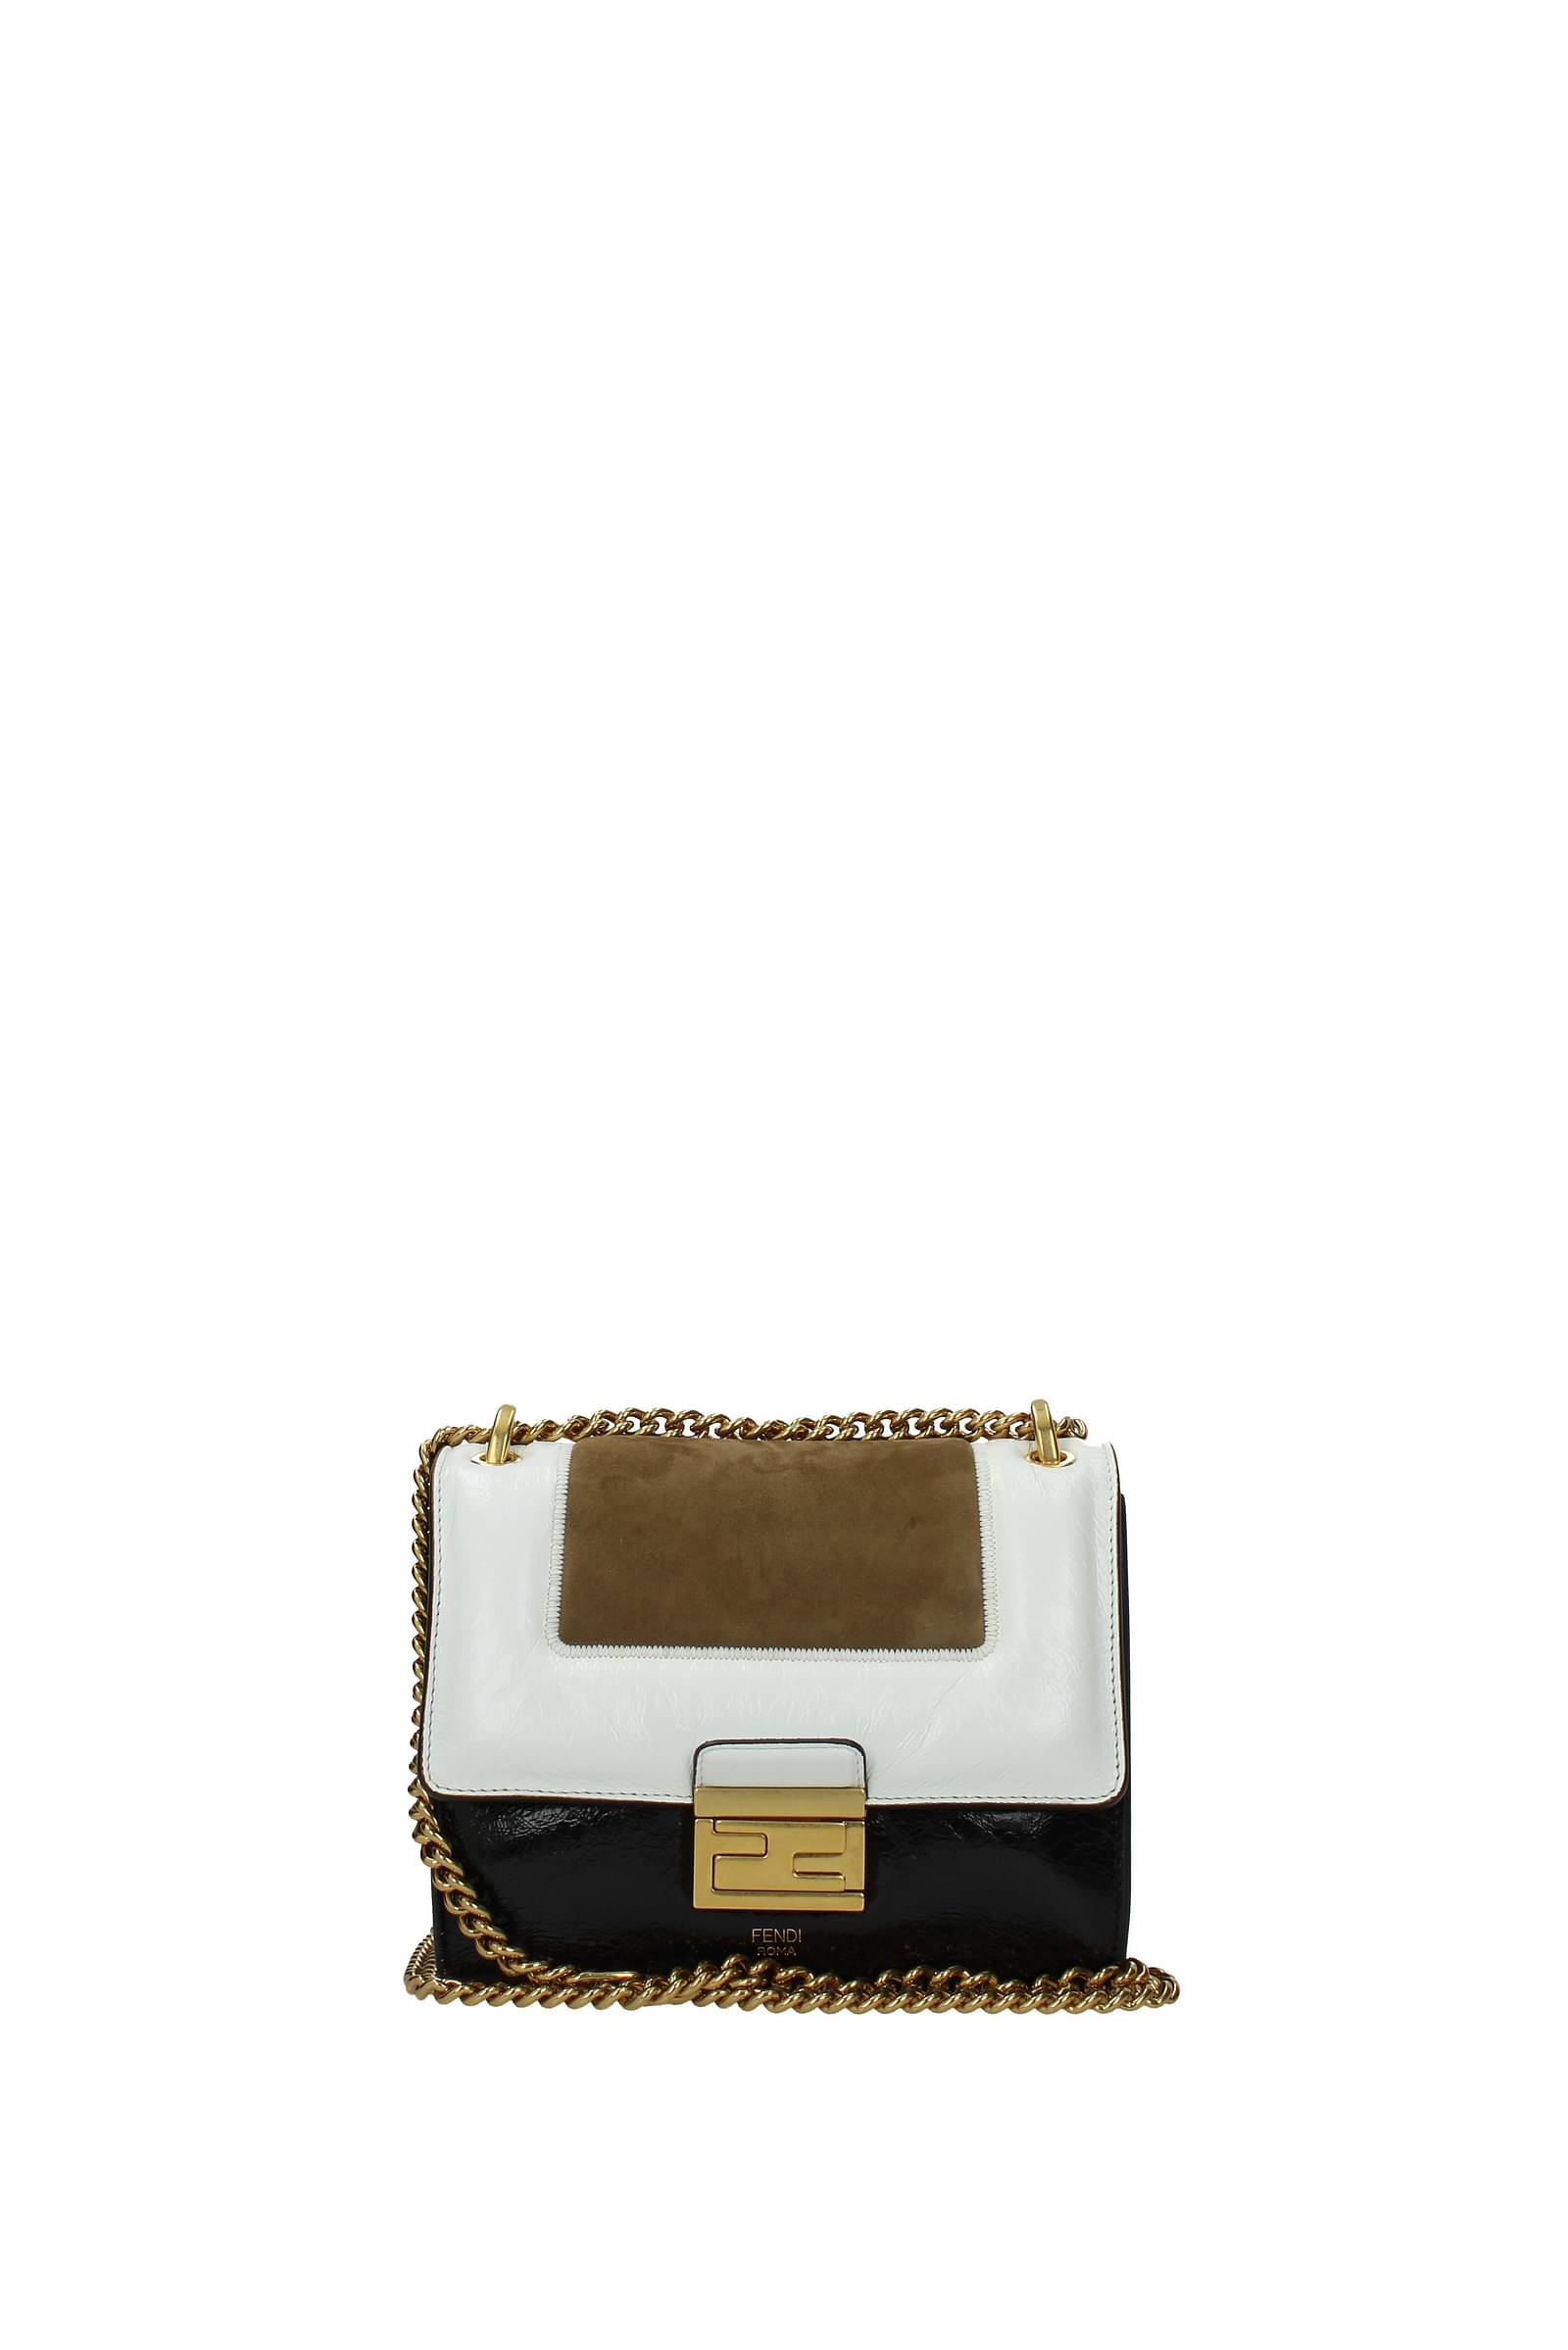 Fendi outlet: discounted prices for 